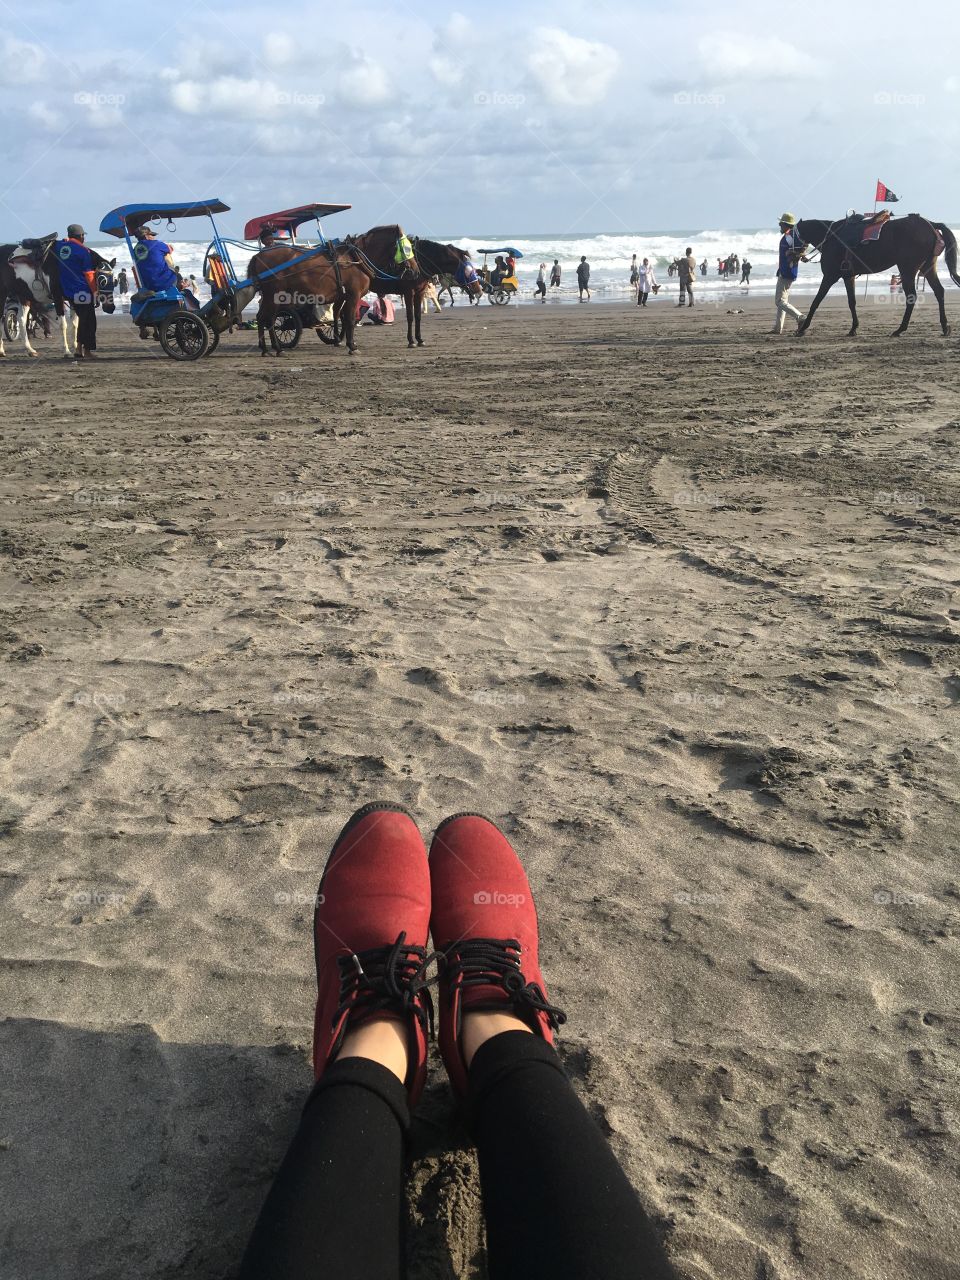 Red boots on the sand